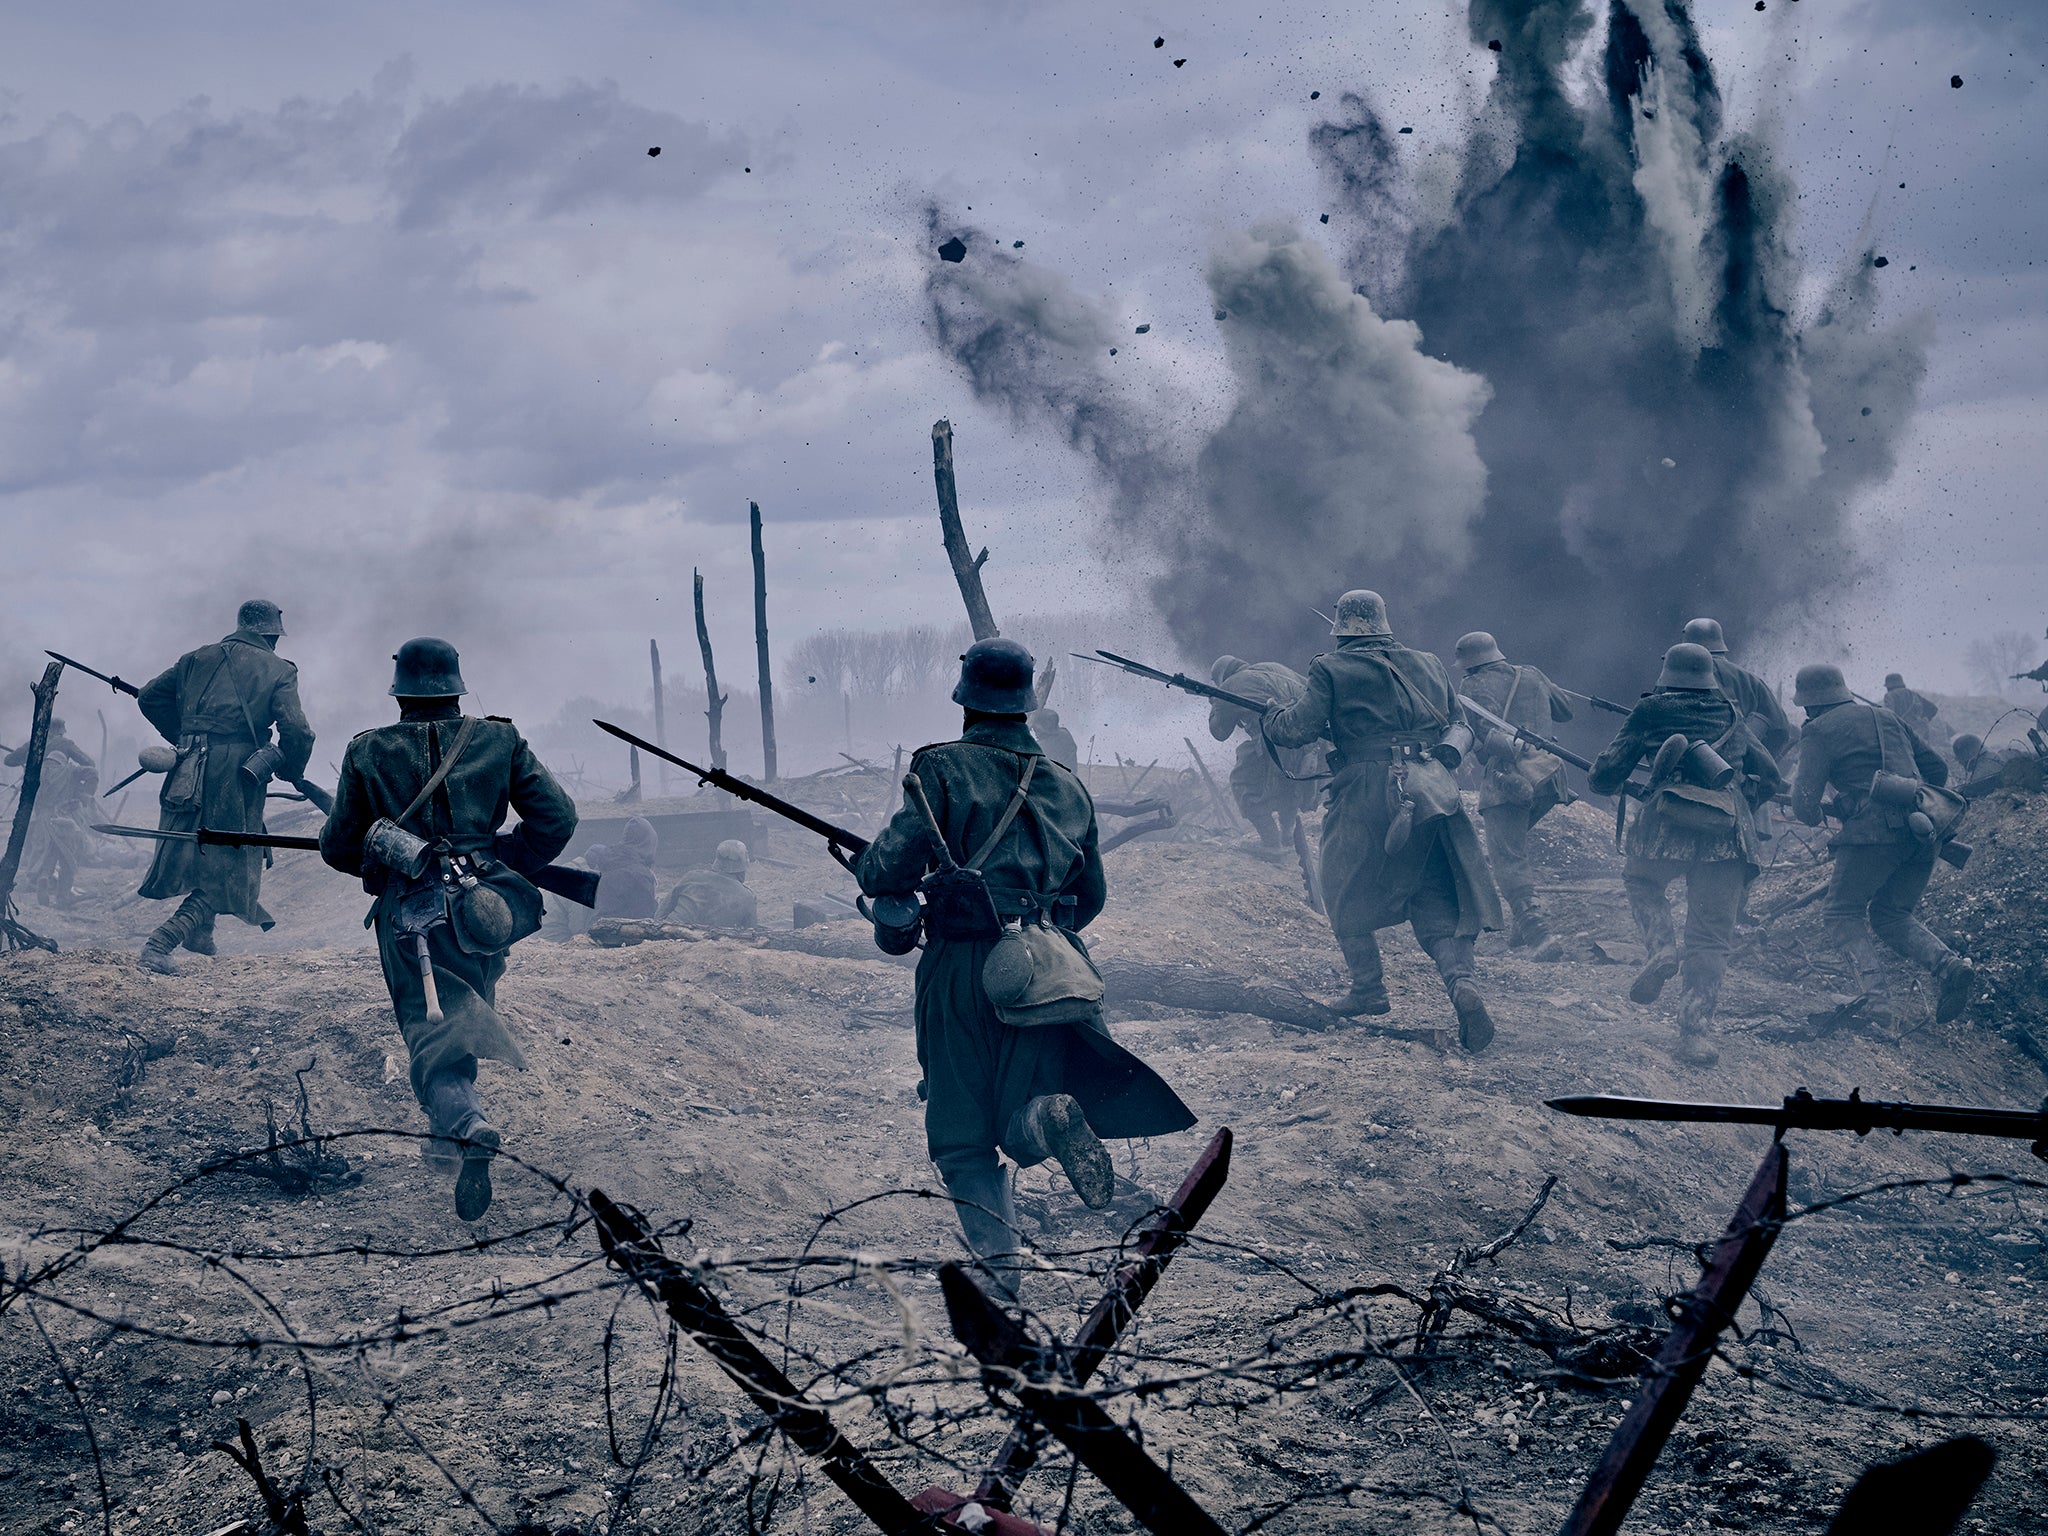 Soldiers go to battle in ‘All Quiet on the Western Front’